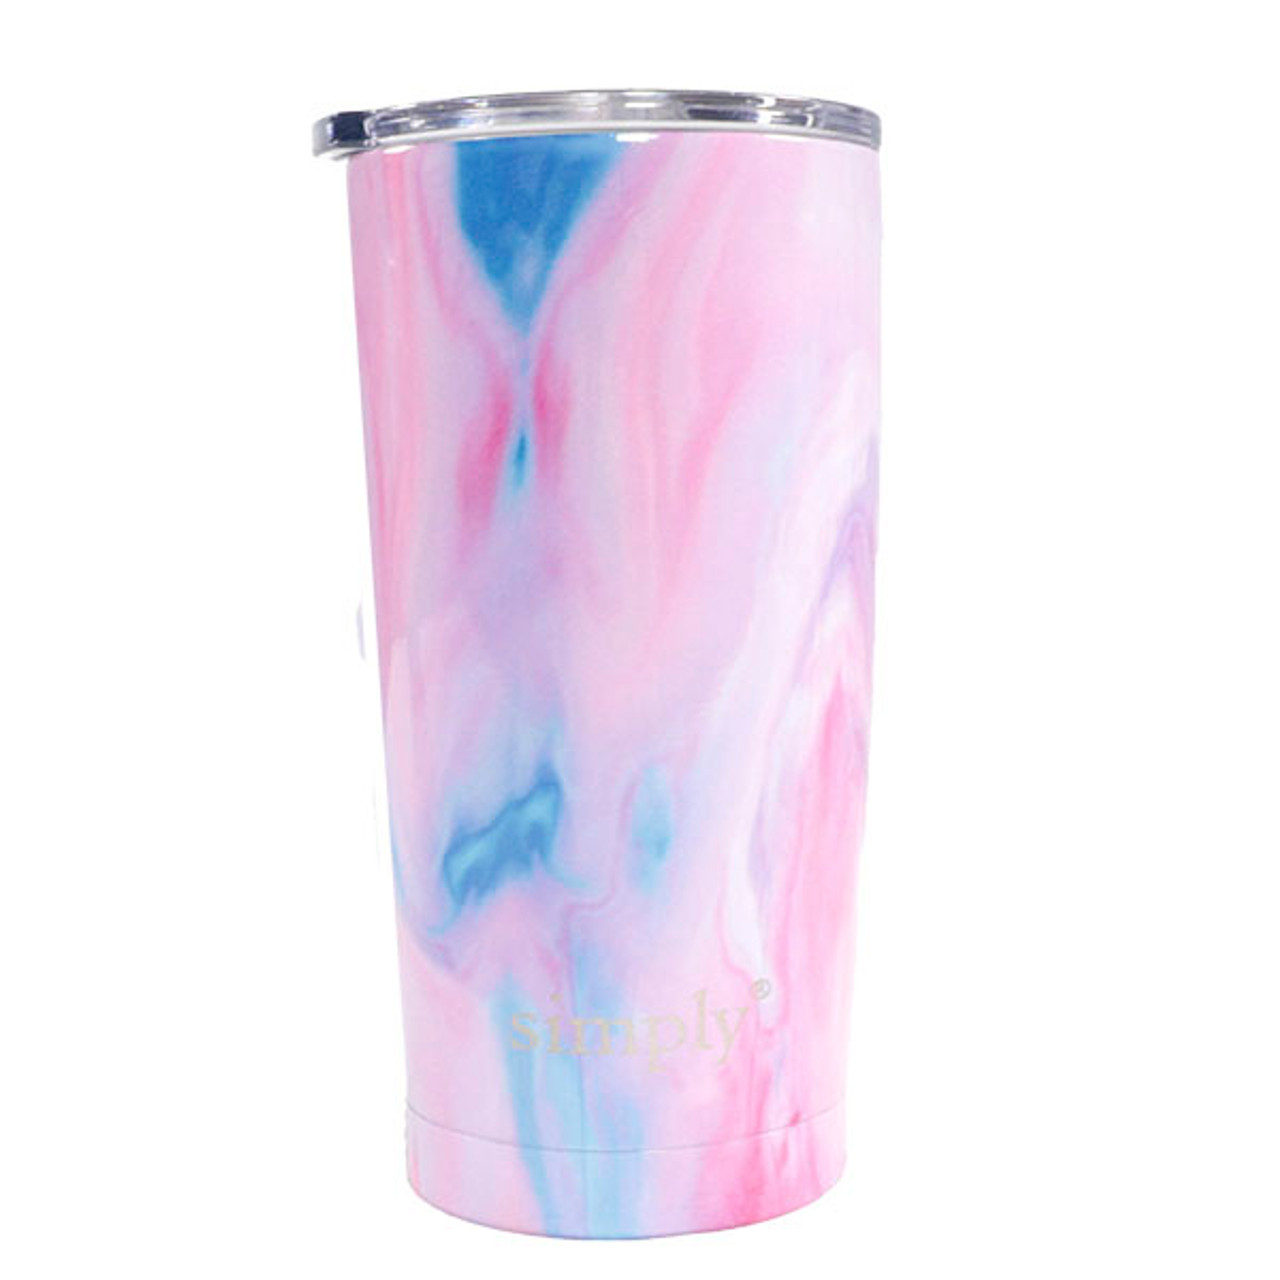 https://cdn11.bigcommerce.com/s-6zwhmb4rdr/images/stencil/1280x1280/products/53545/209318/20-oz-pink-marble-tumbler-by-simply-southern-13__49192.1650484156.jpg?c=1